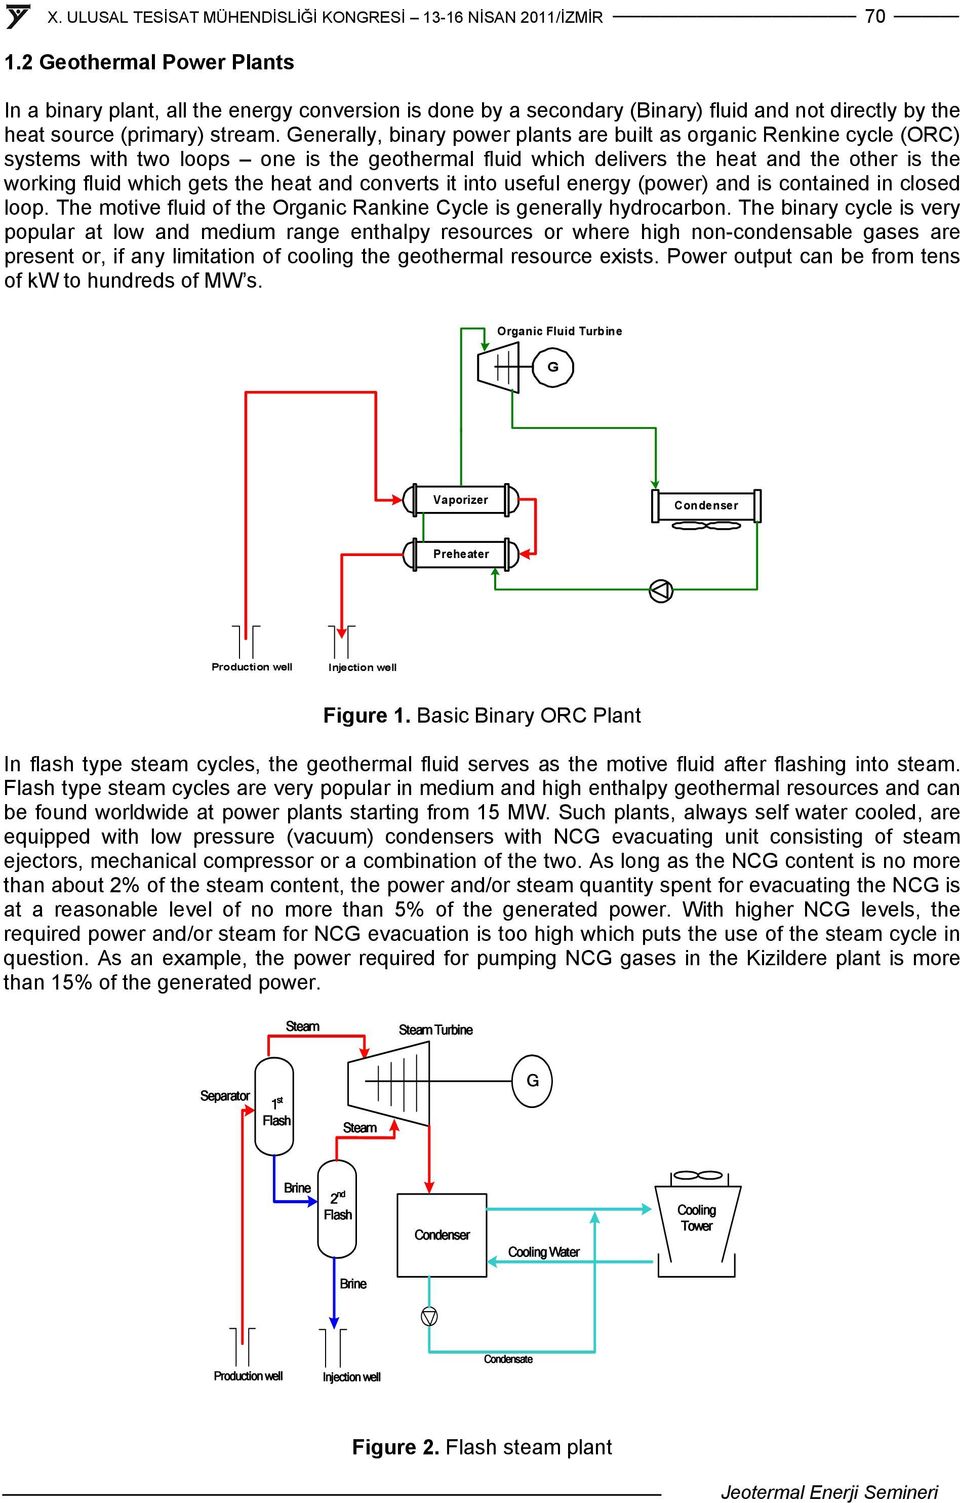 Generally, binary power plants are built as organic Renkine cycle (ORC) systems with two loops one is the geothermal fluid which delivers the heat and the other is the working fluid which gets the